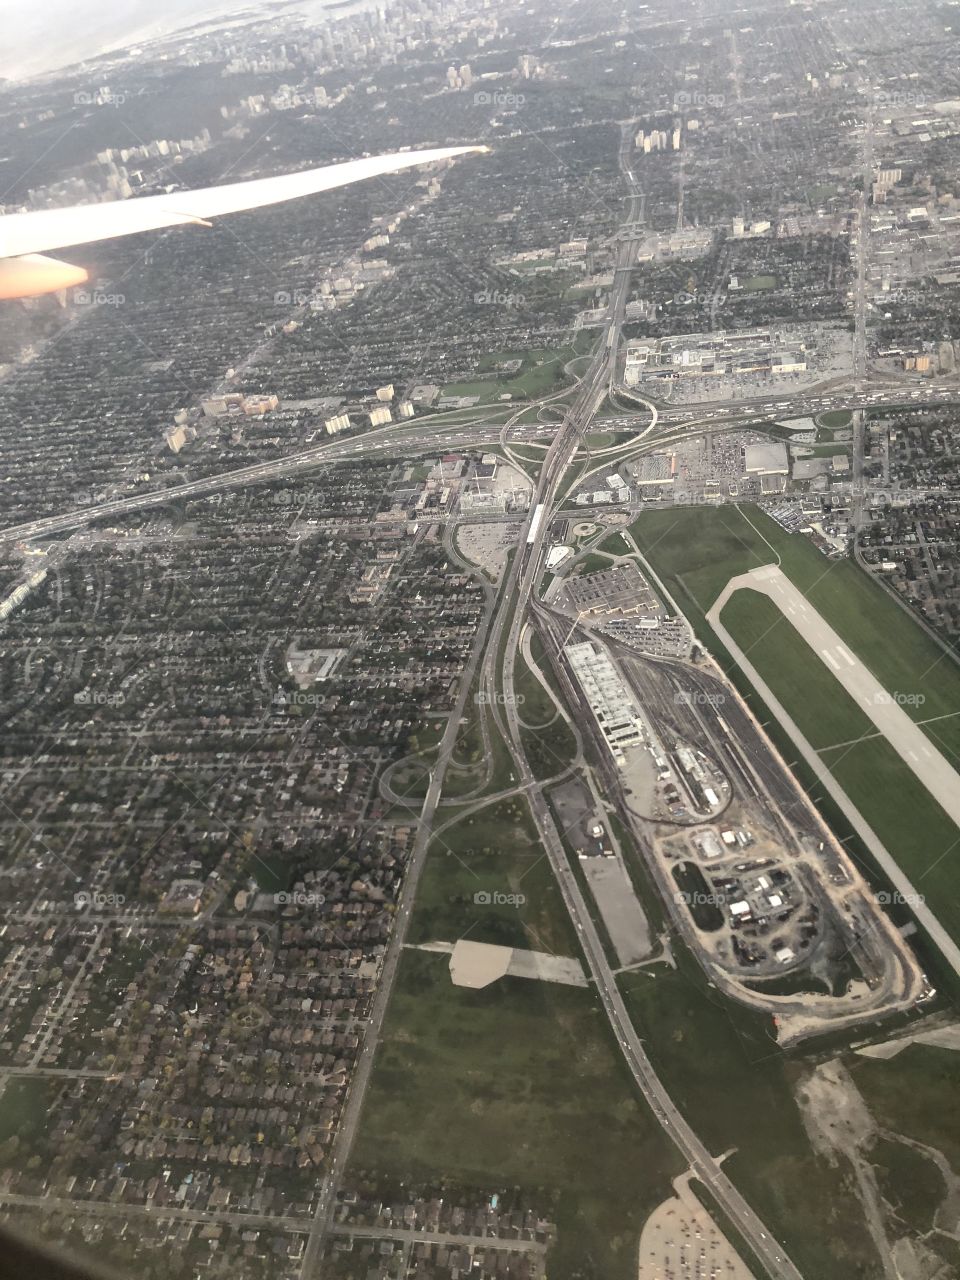 View of Toronto highway system from air. 